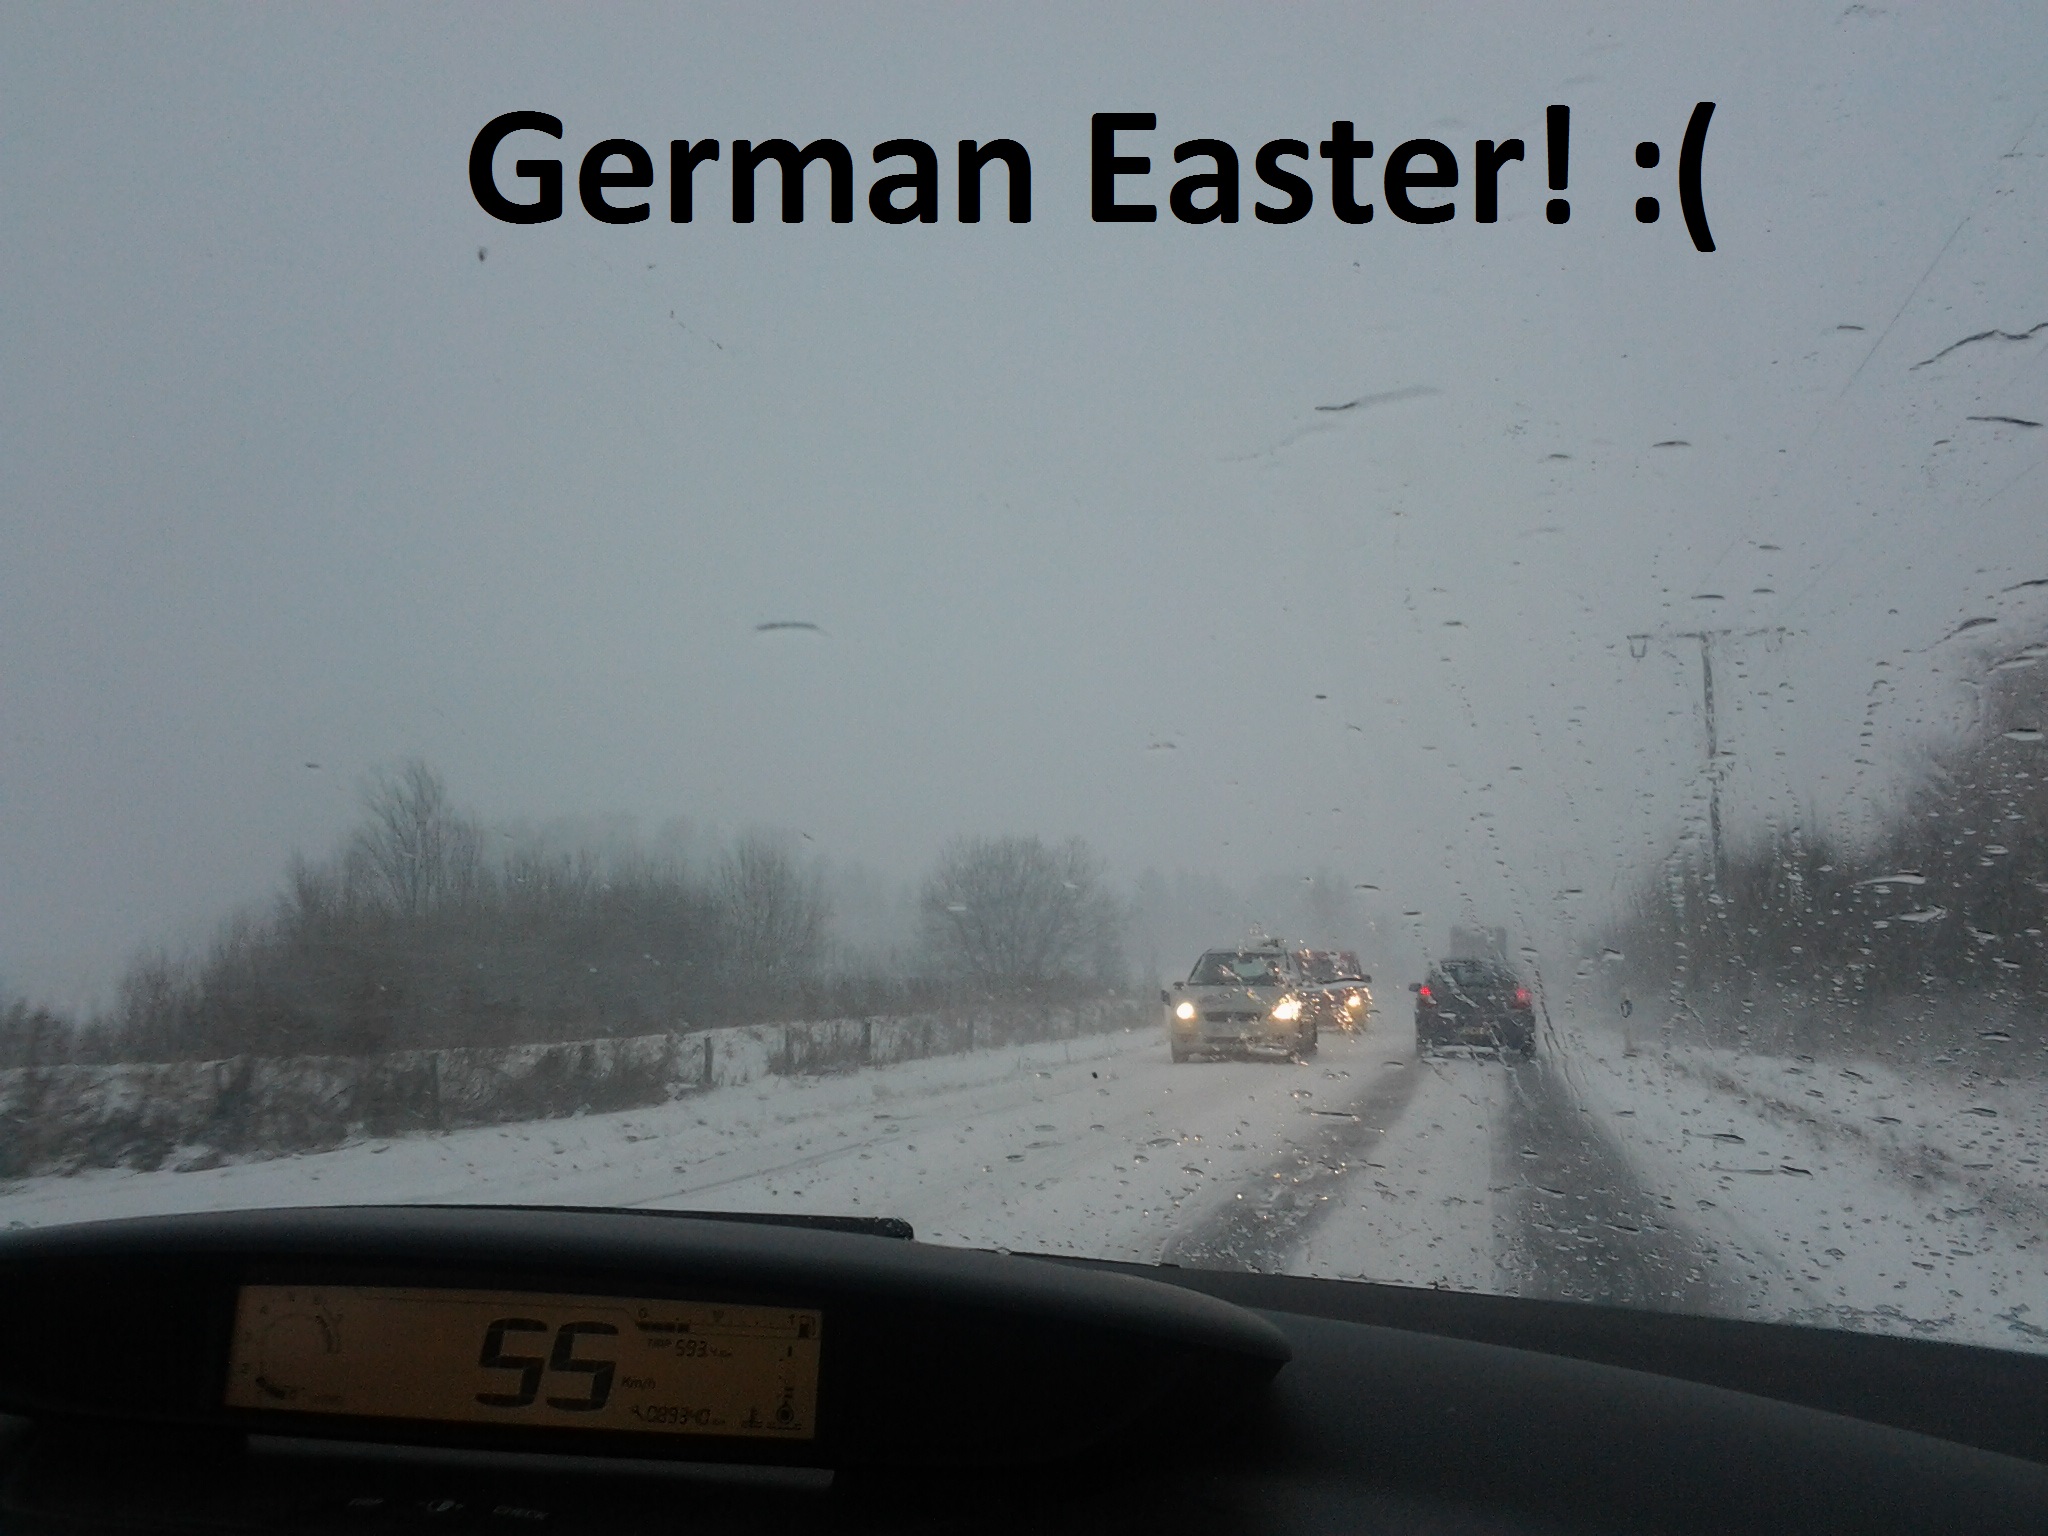 Thats what Easter looks like in germany!